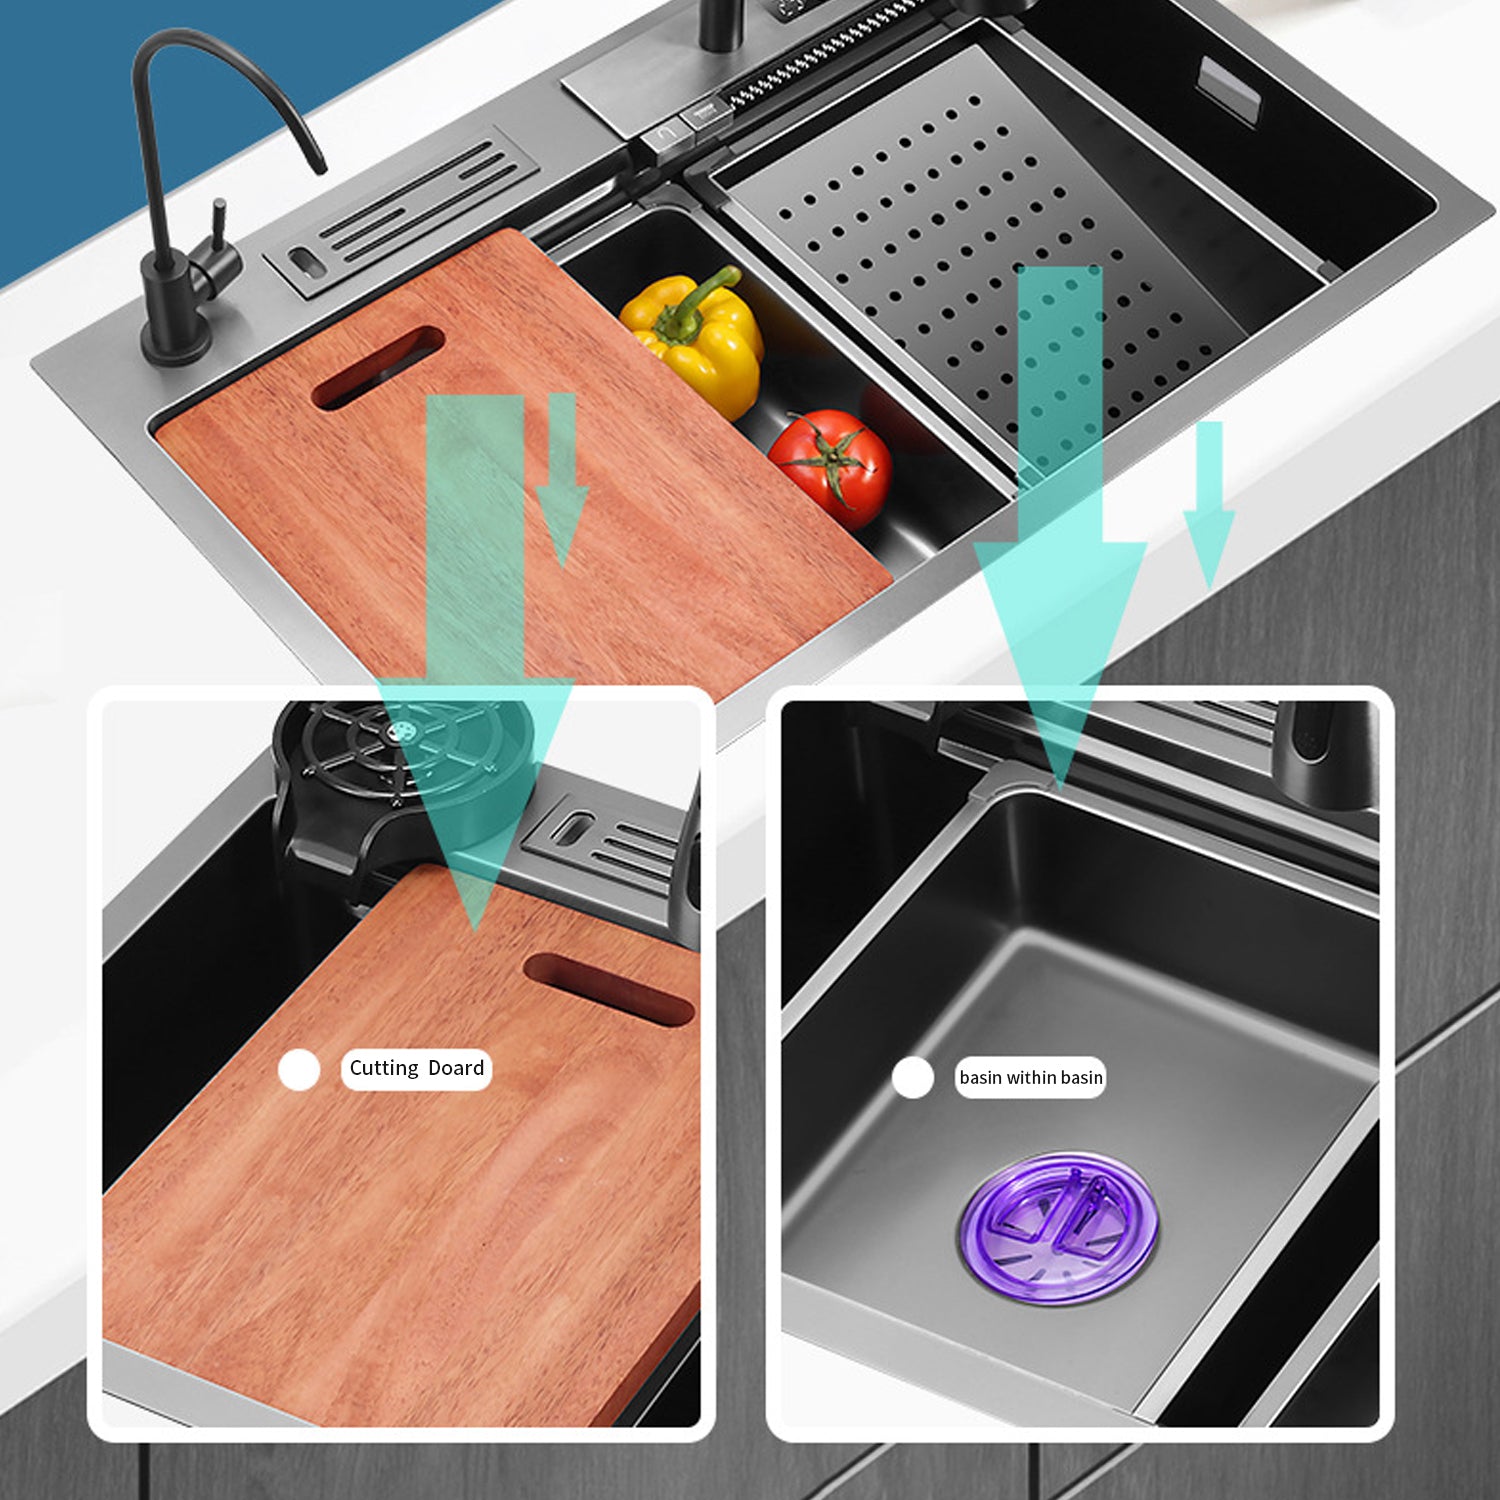 Waterfall Workstation Kitchen Sink Set With Digital Temperature – FLAME AND  FLAVOR